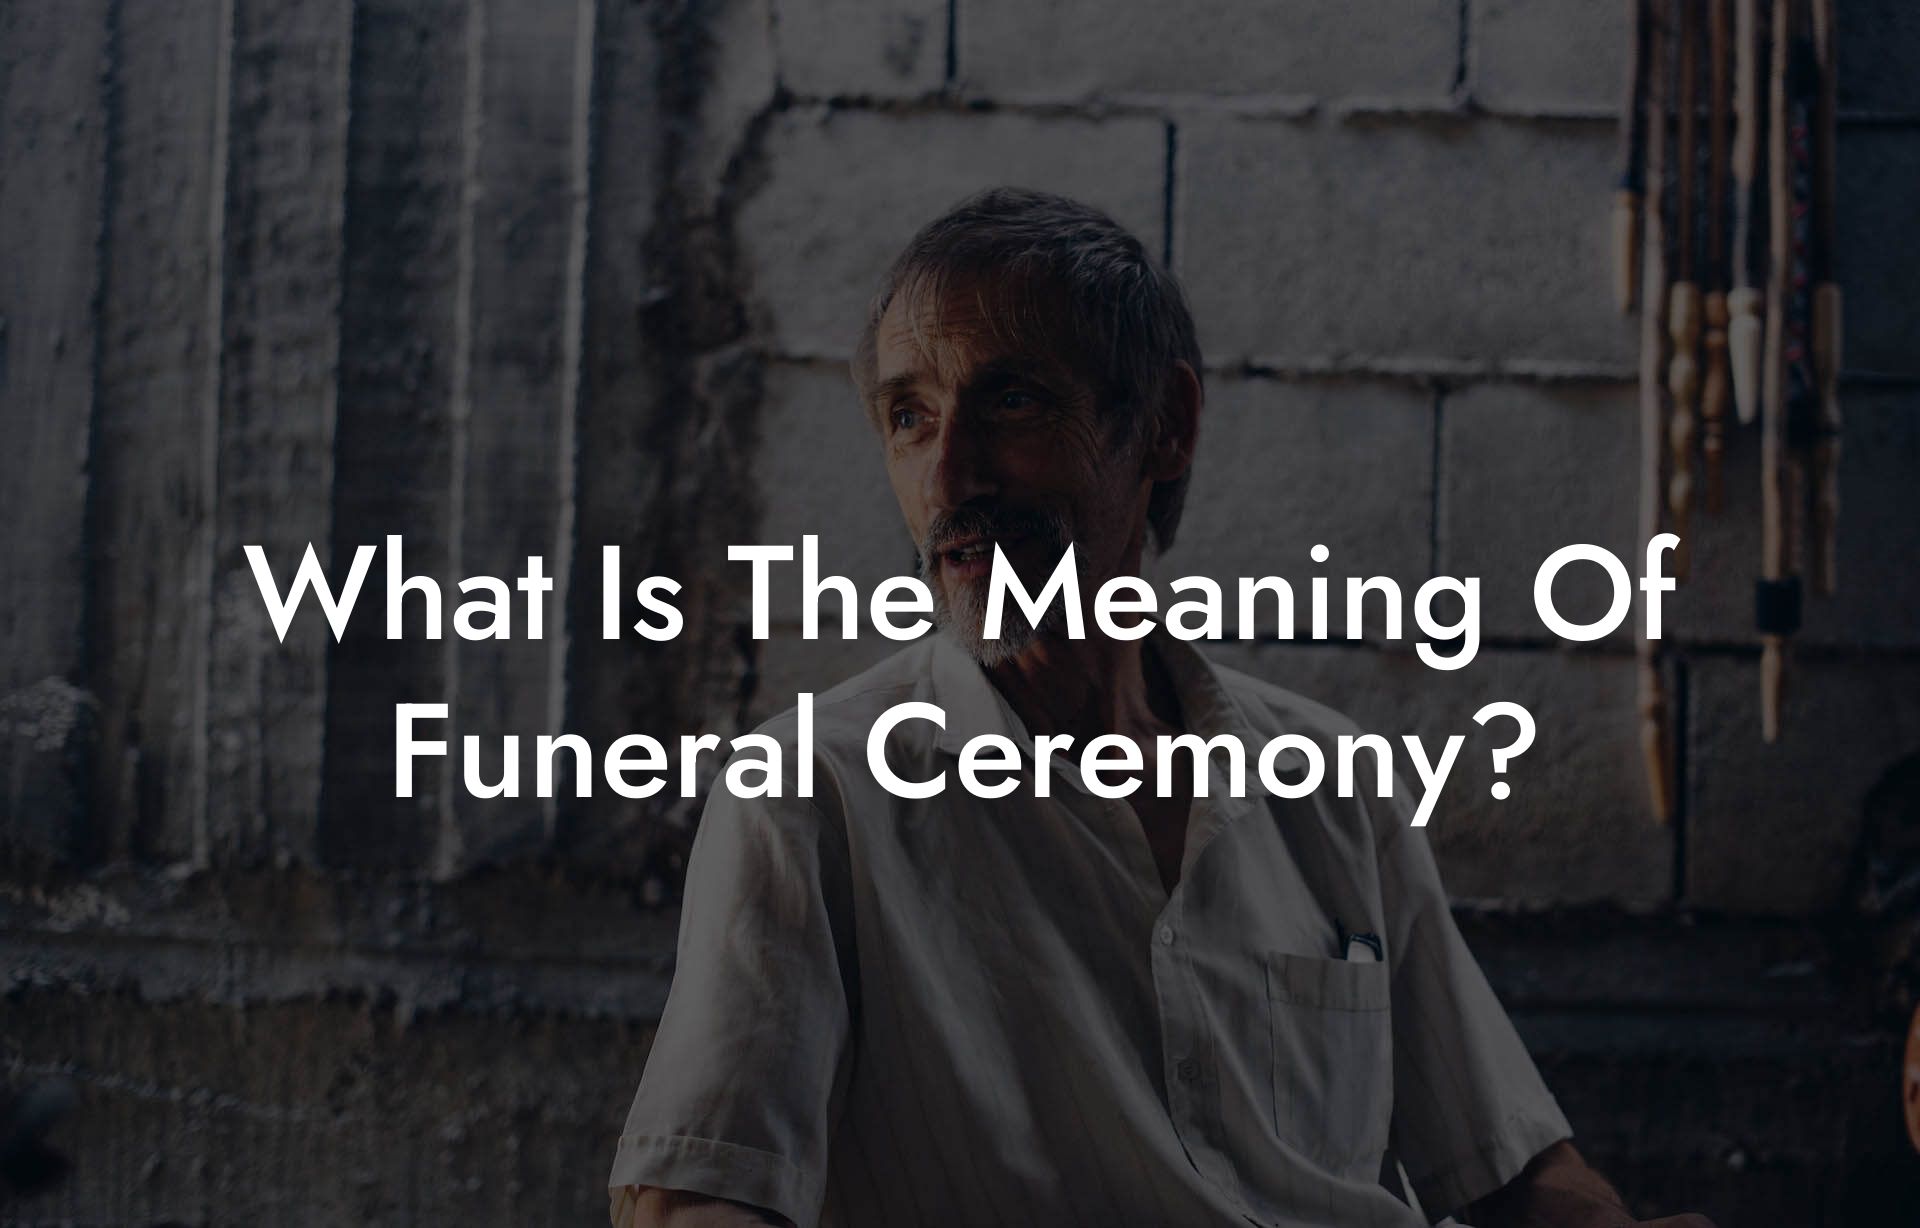 What Is The Meaning Of Funeral Ceremony?